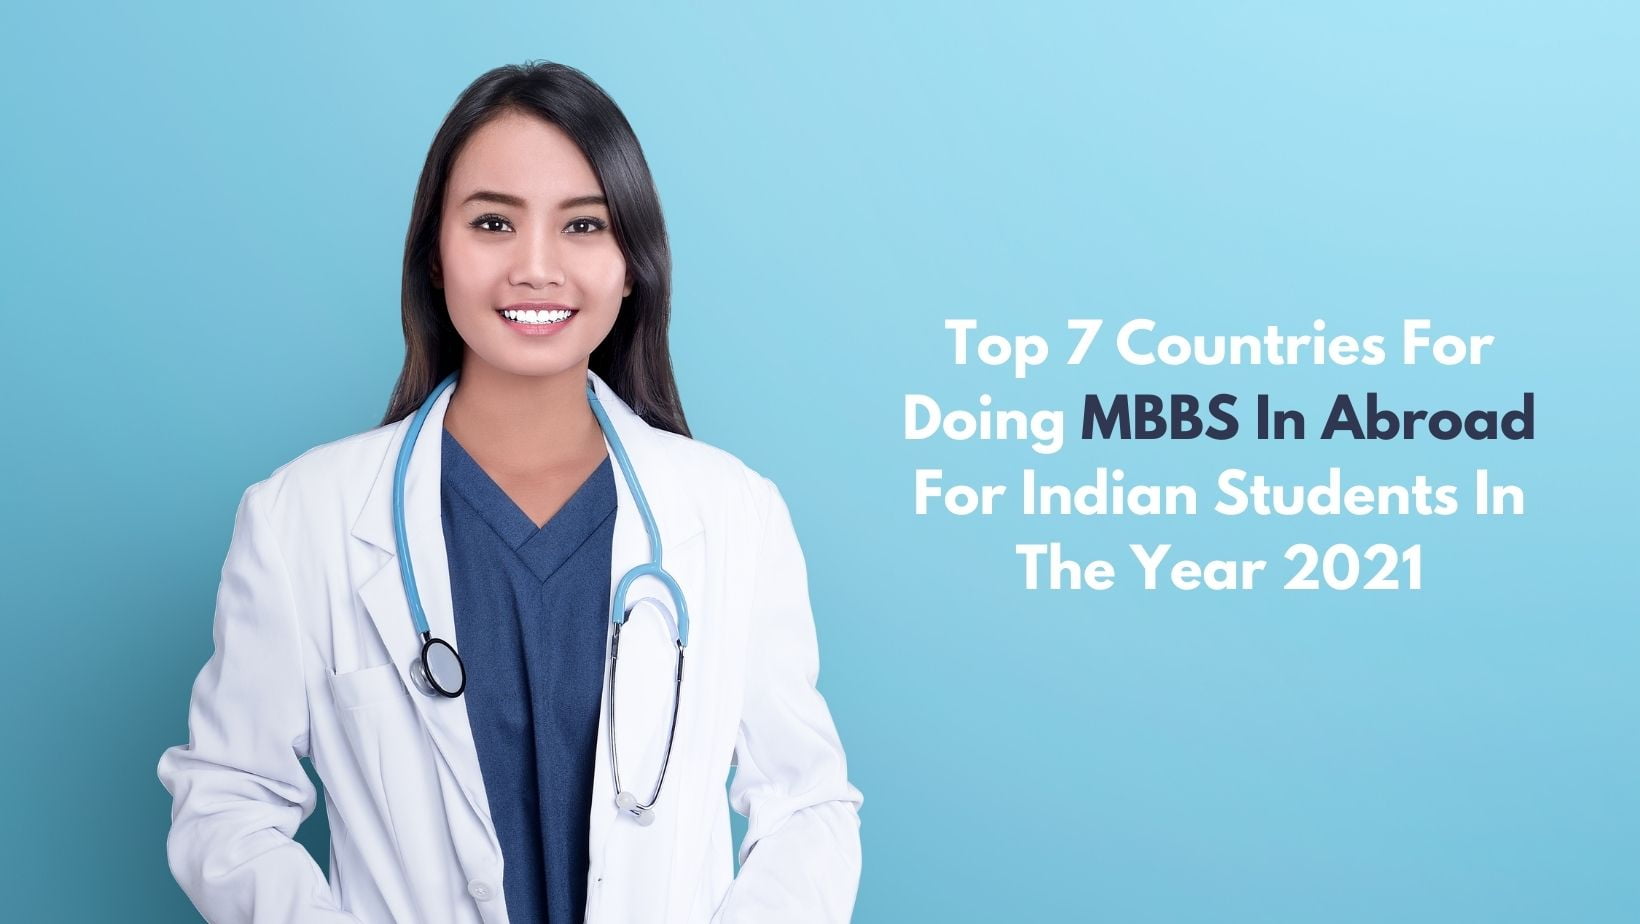 Top 7 Countries For Doing MBBS In Abroad For Indian Students In The Year 2021